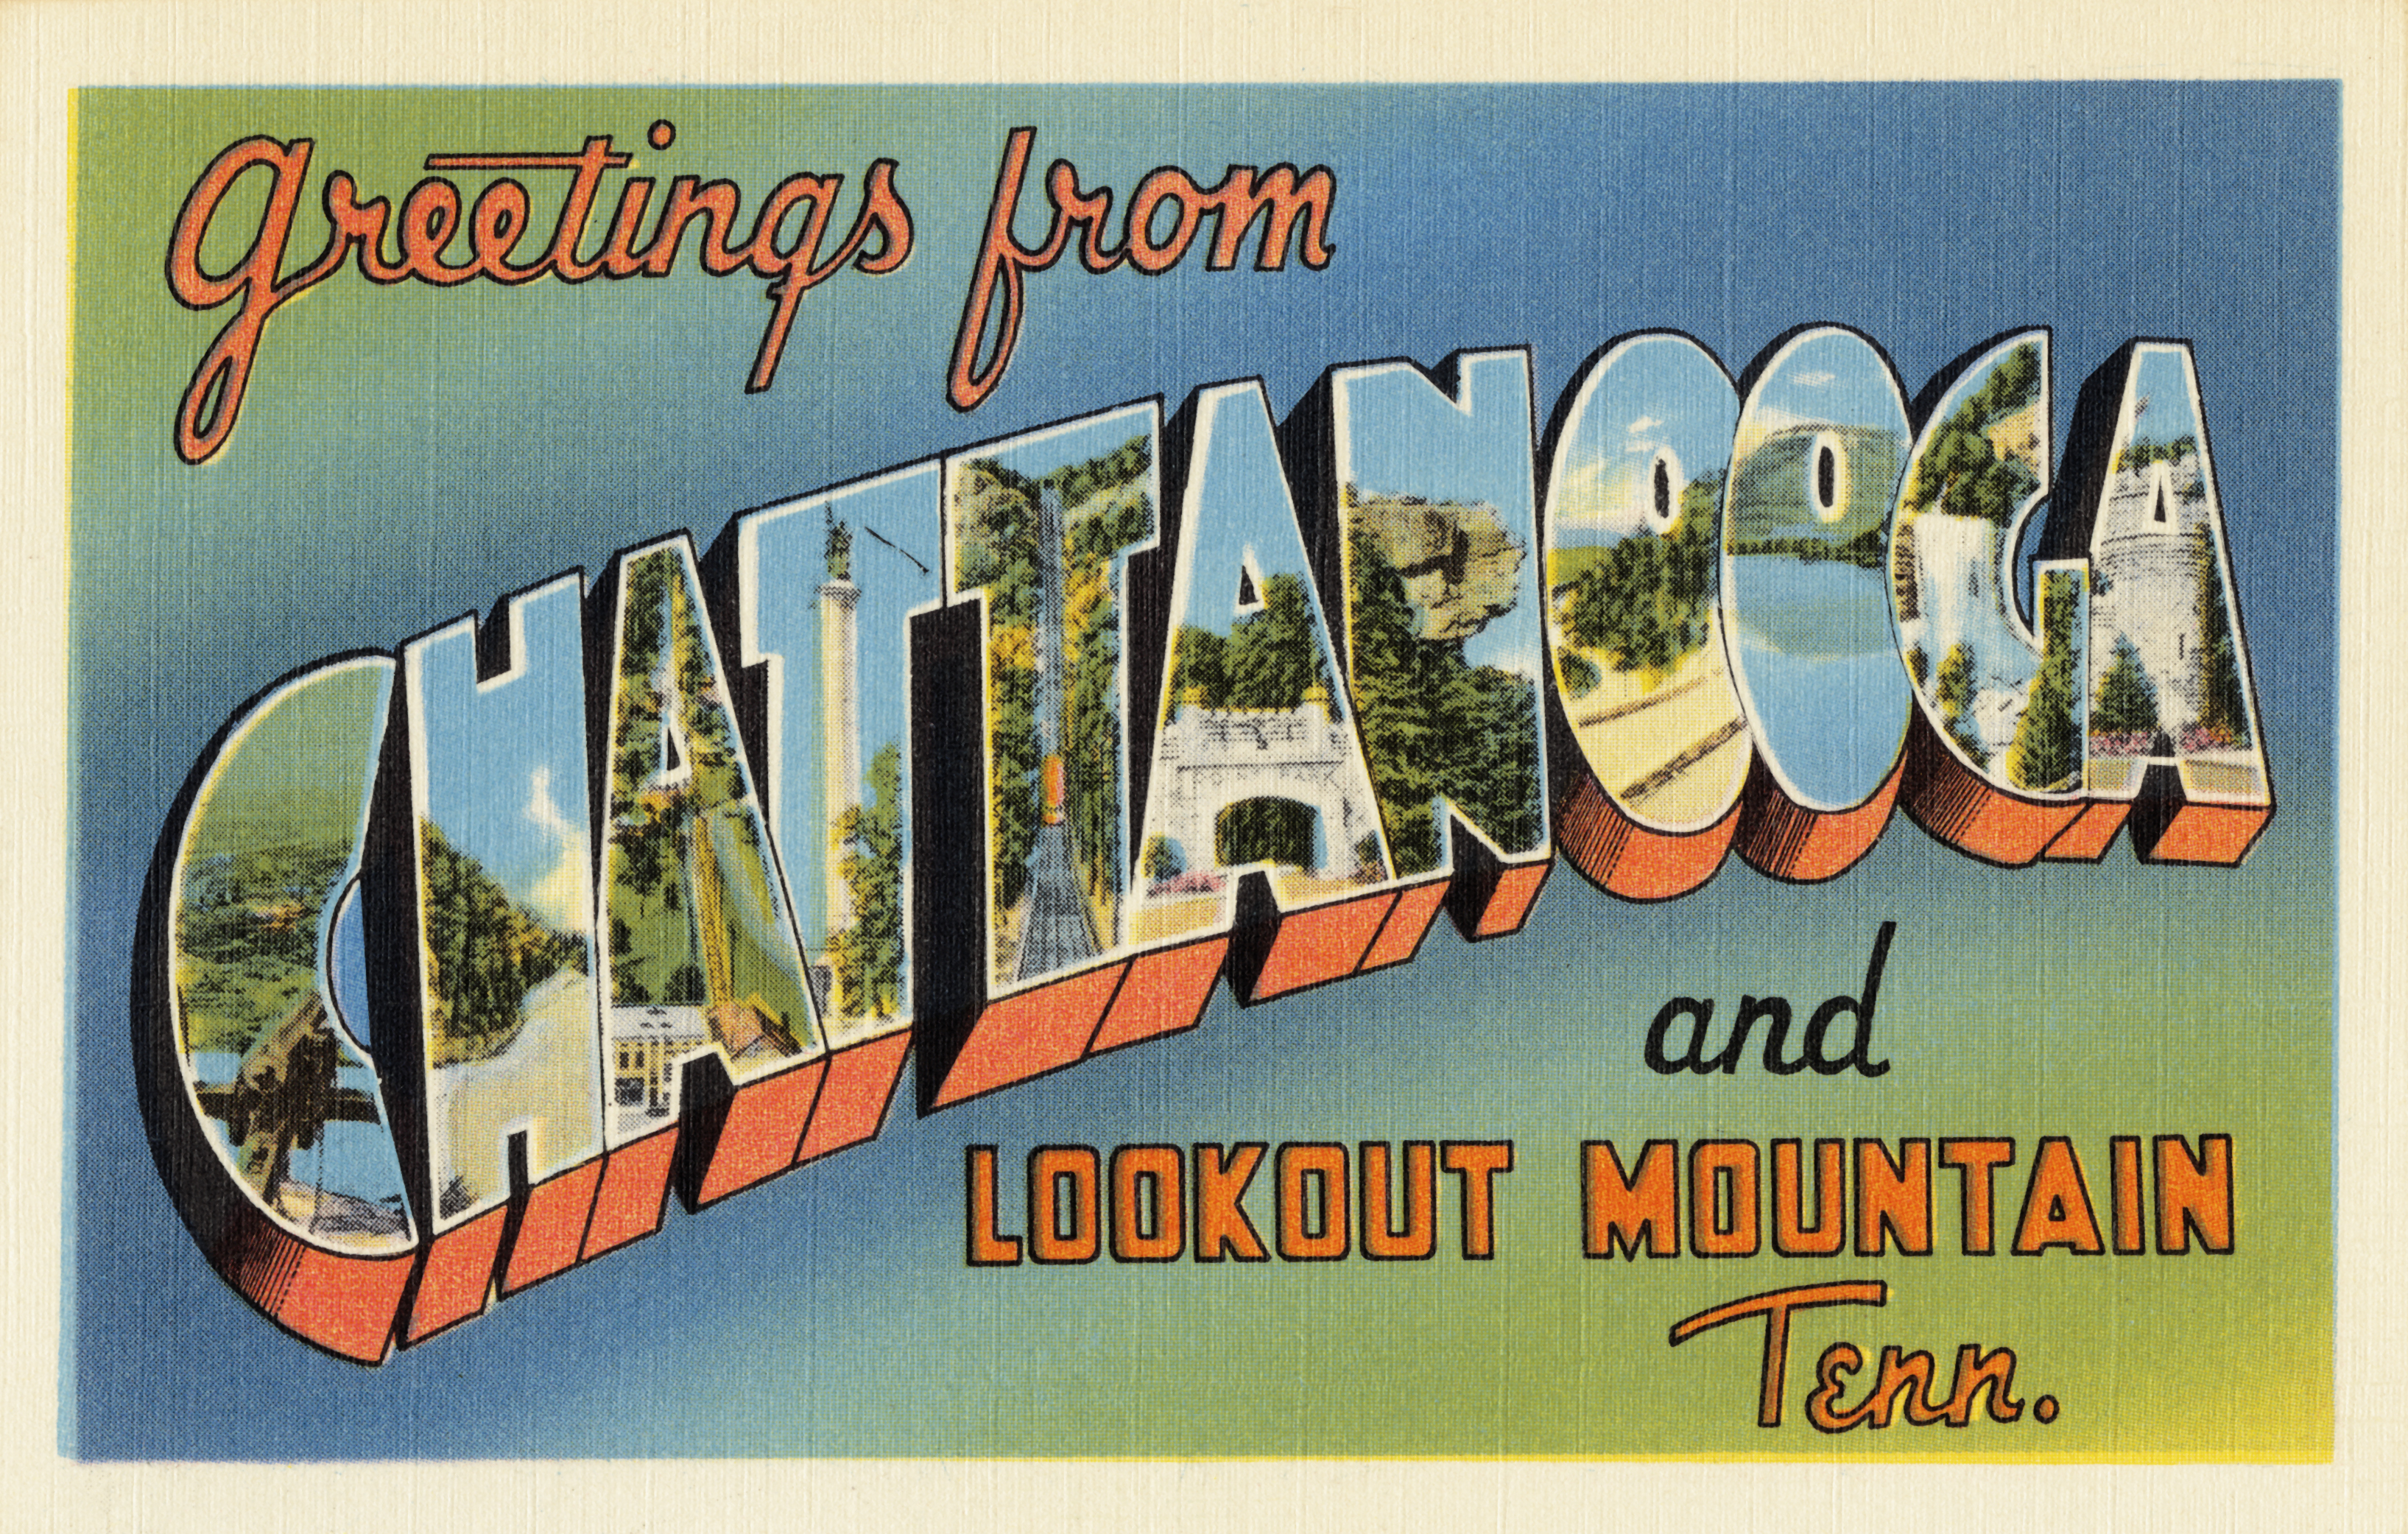 Greetings from Chattanooga and Lookout Mountain, Tenn.